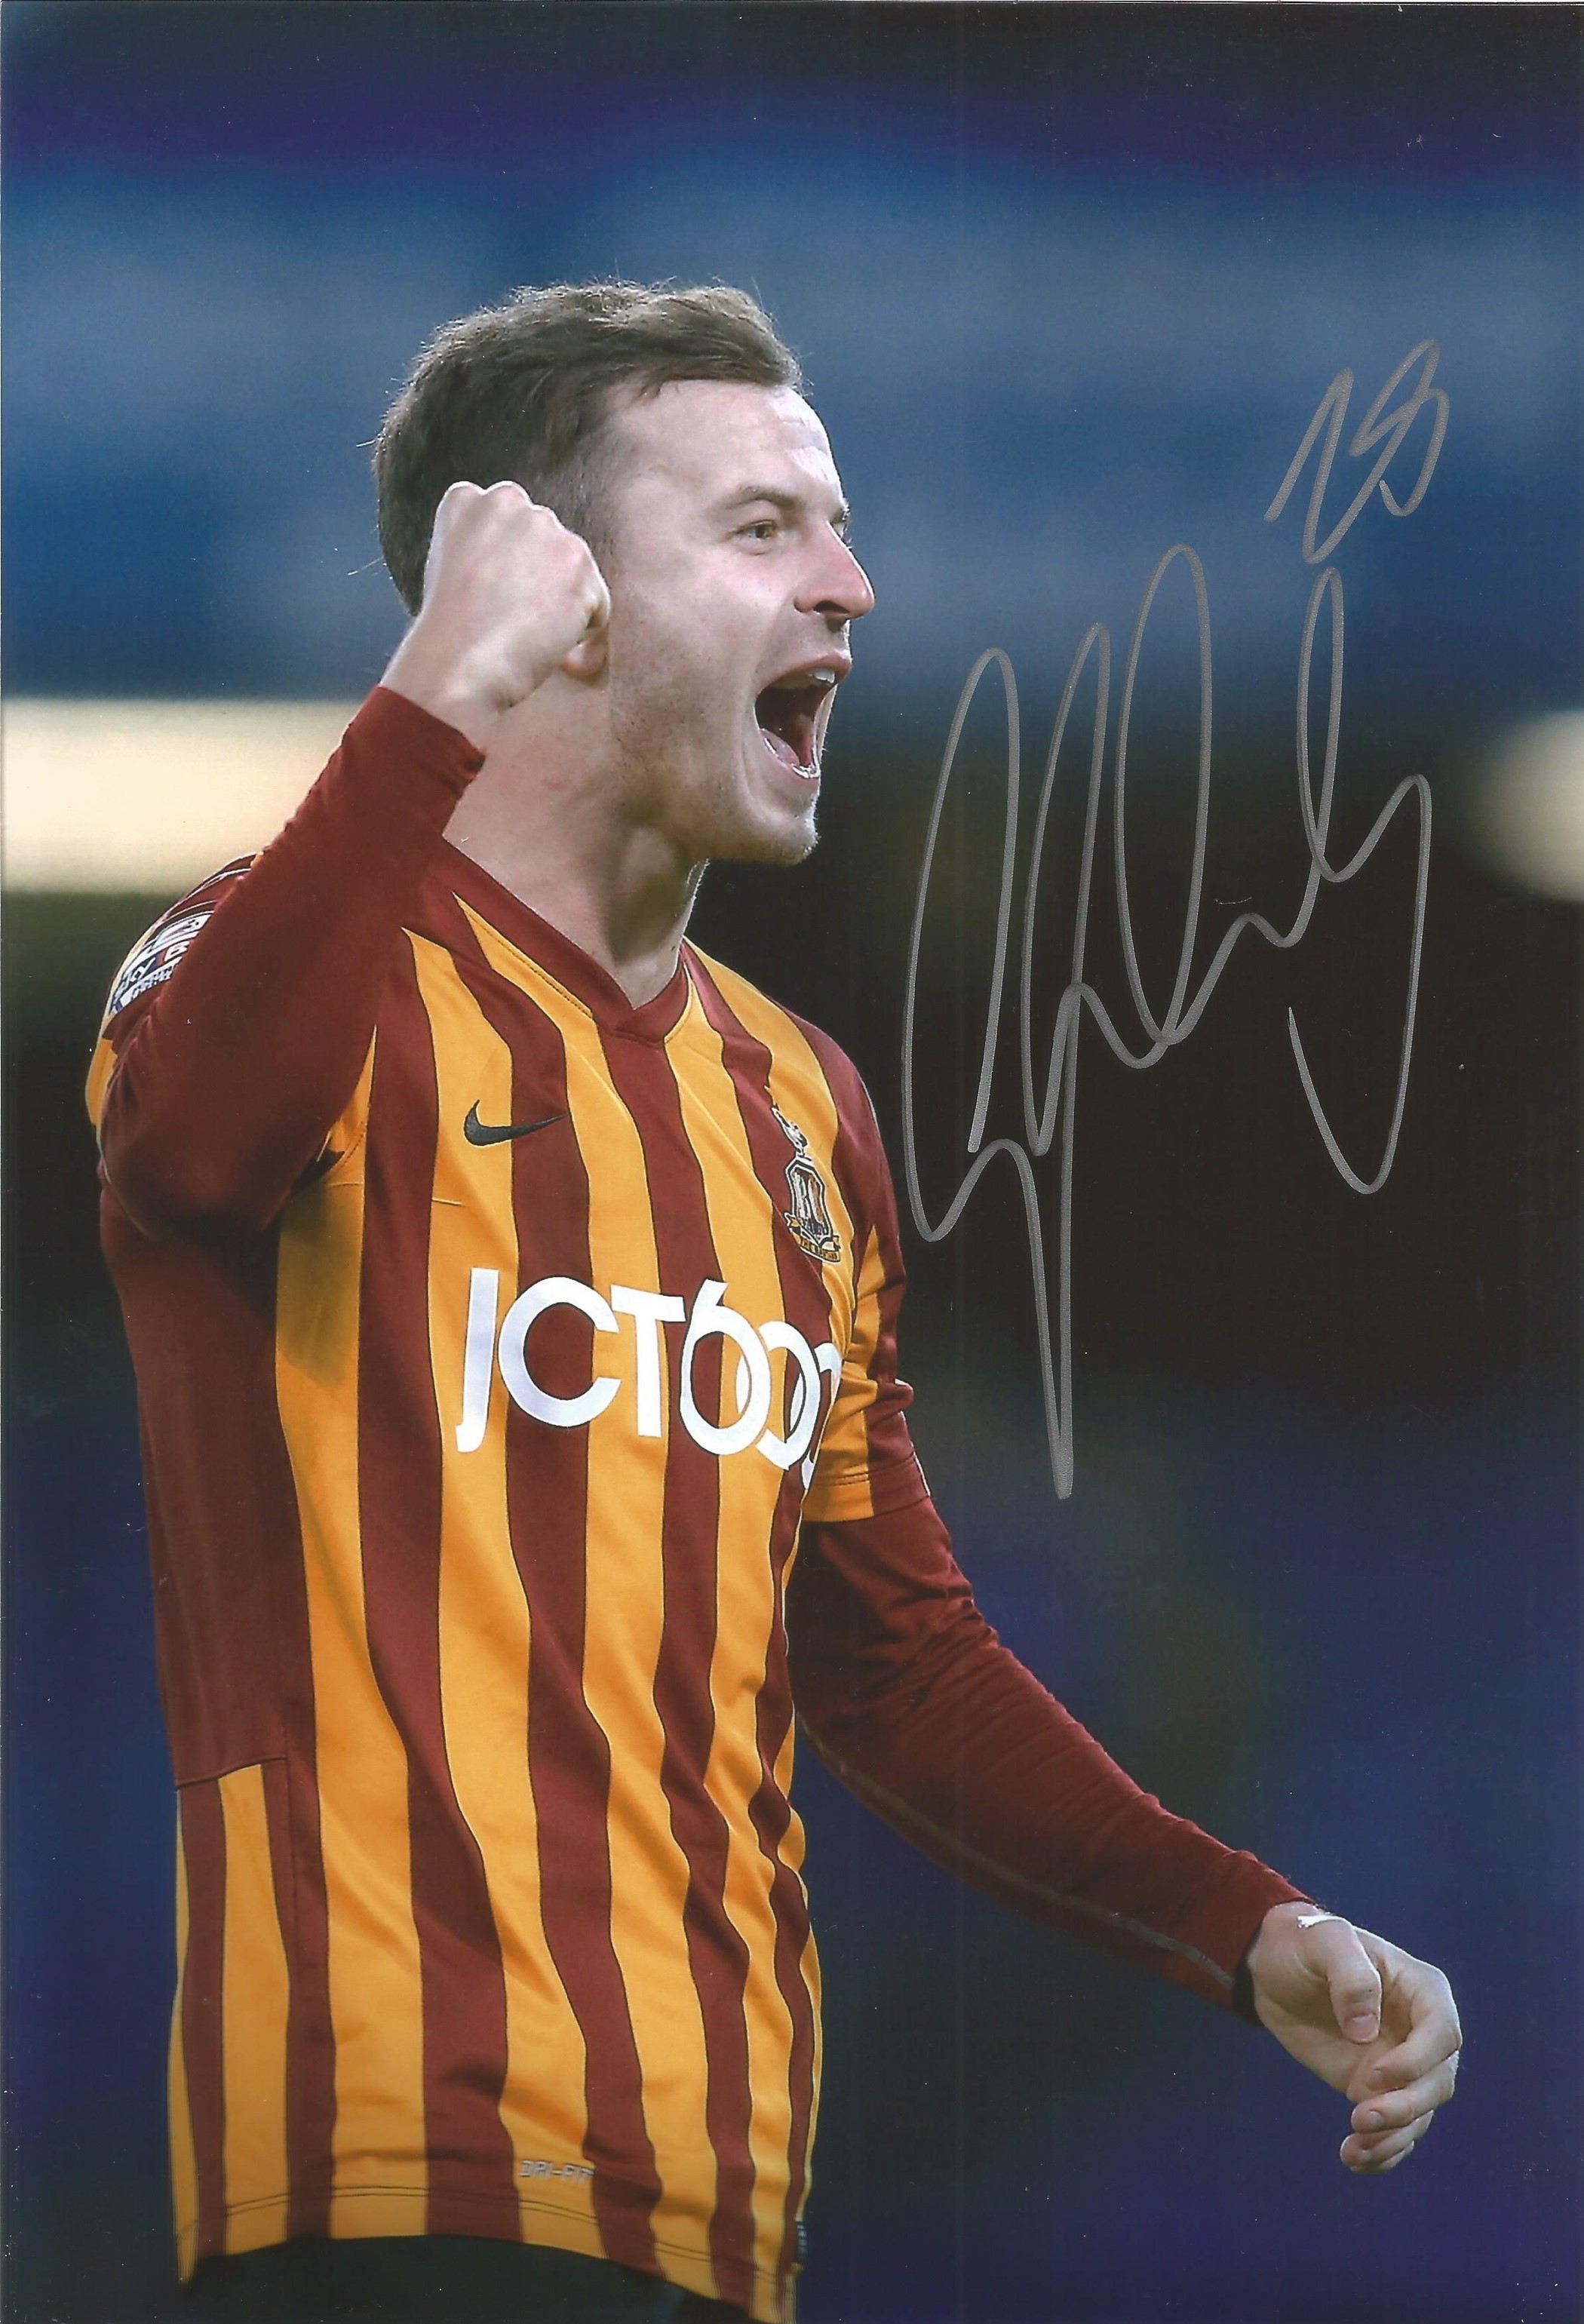 Andy Halliday Bradford Signed 12 x 8 inch football photo. Good condition. All autographs come with a